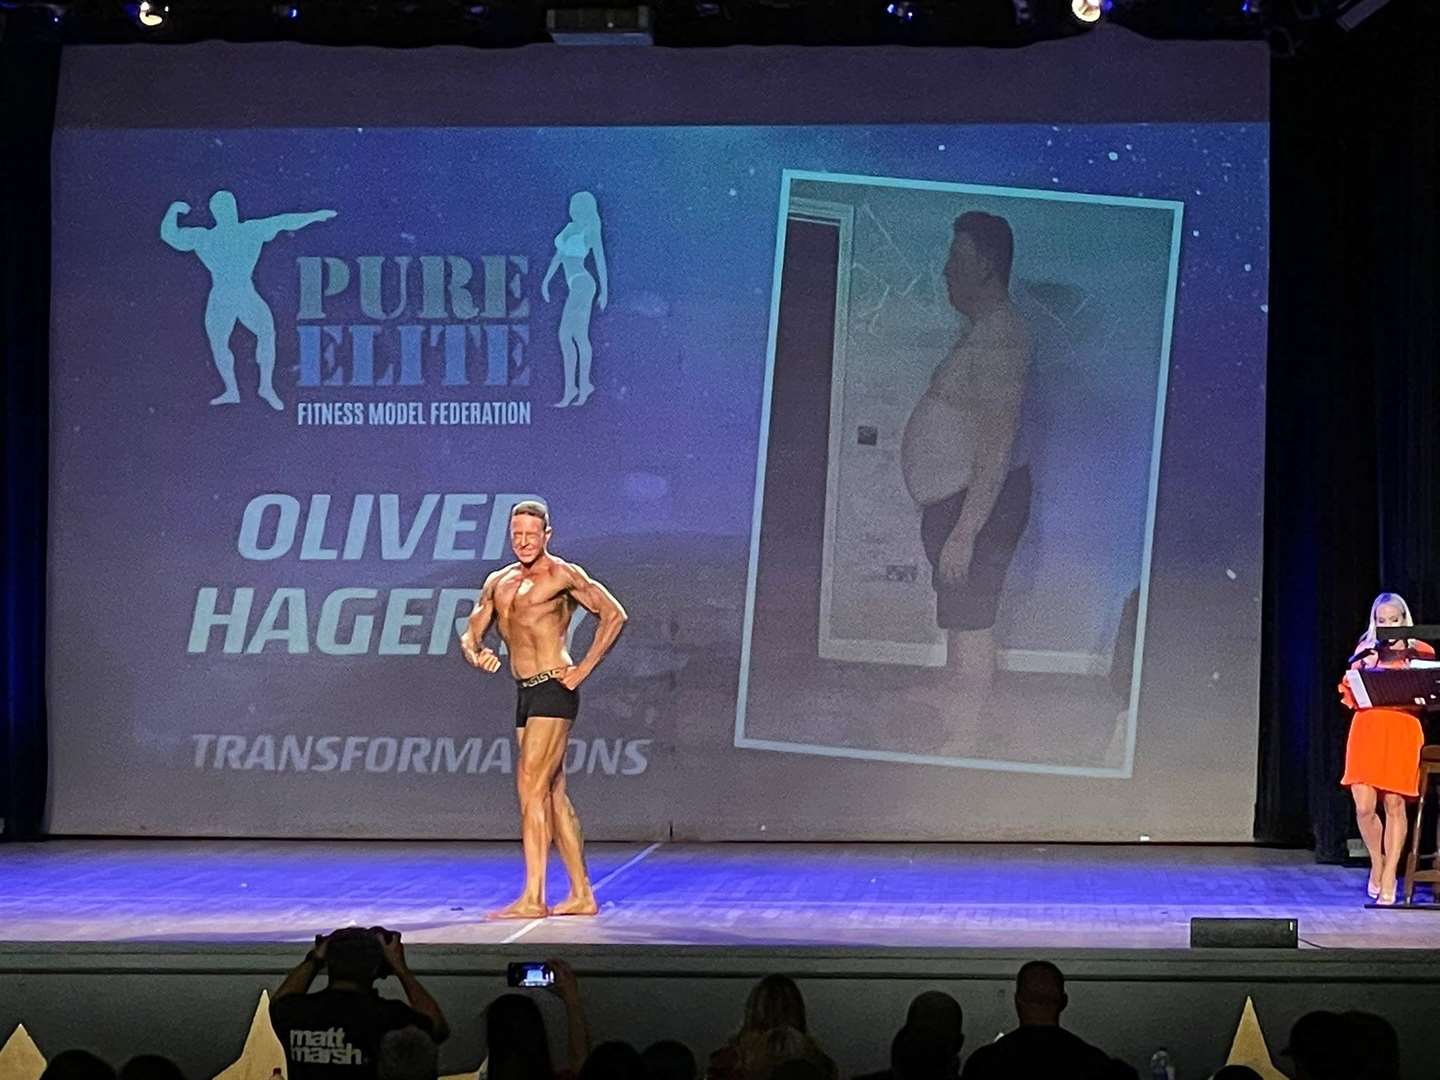 The Faversham construction worker took part in a Pure Elite bodybuilding event at Margate’s Winter Gardens, winning its transformation category